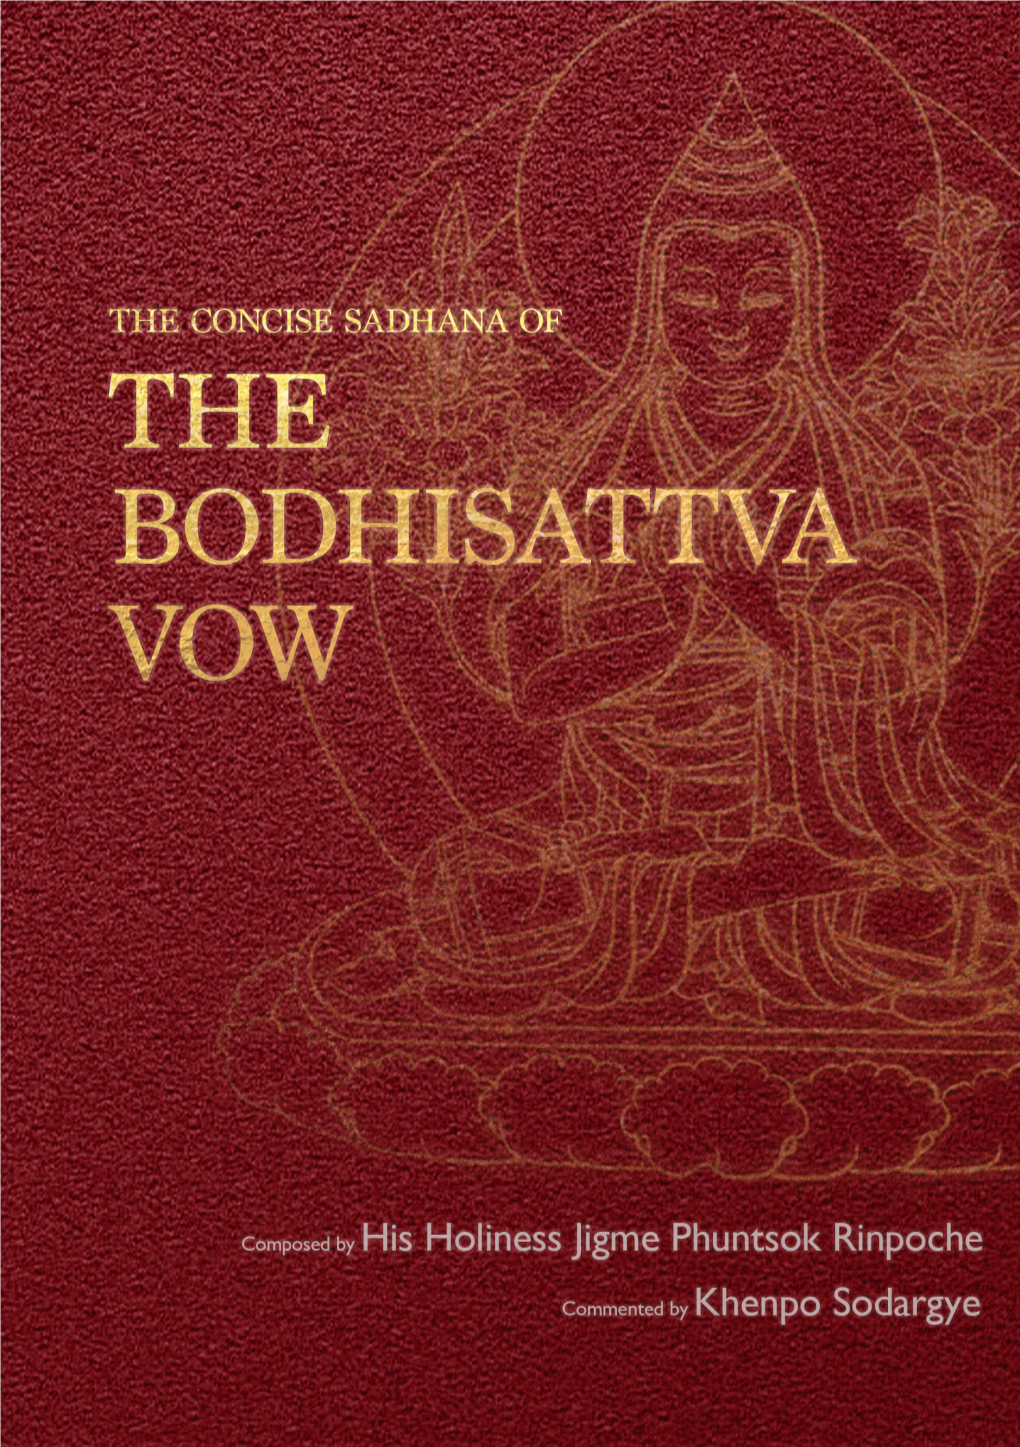 The Concise Sadhana of the Bodhisattva Vow